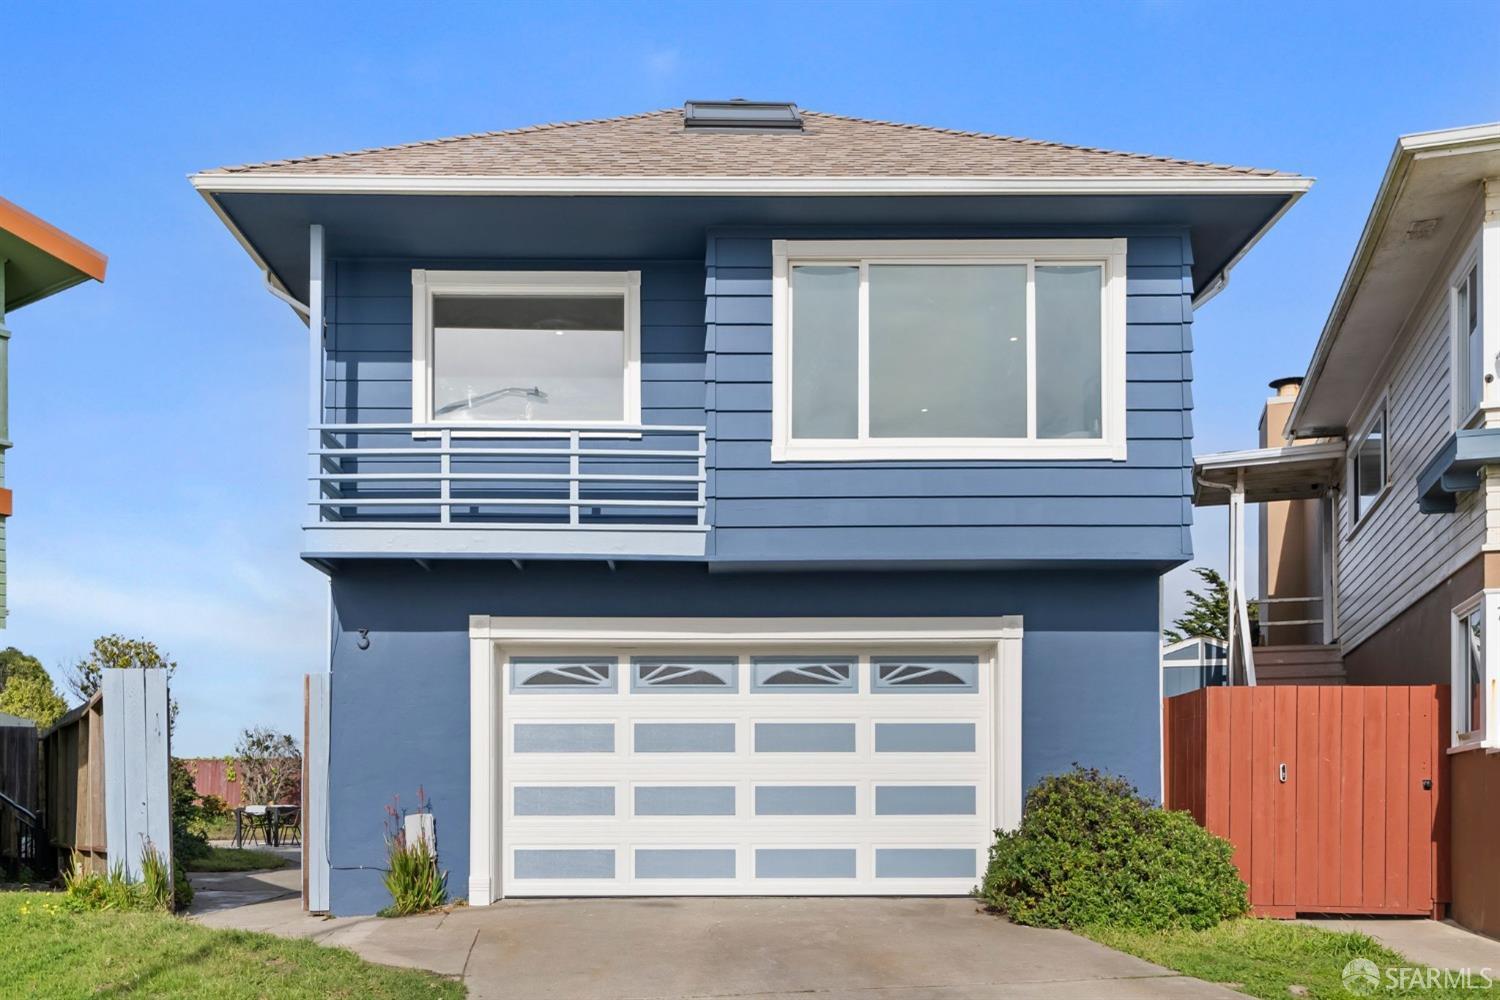 Photo of 3 Skyline Dr in Daly City, CA